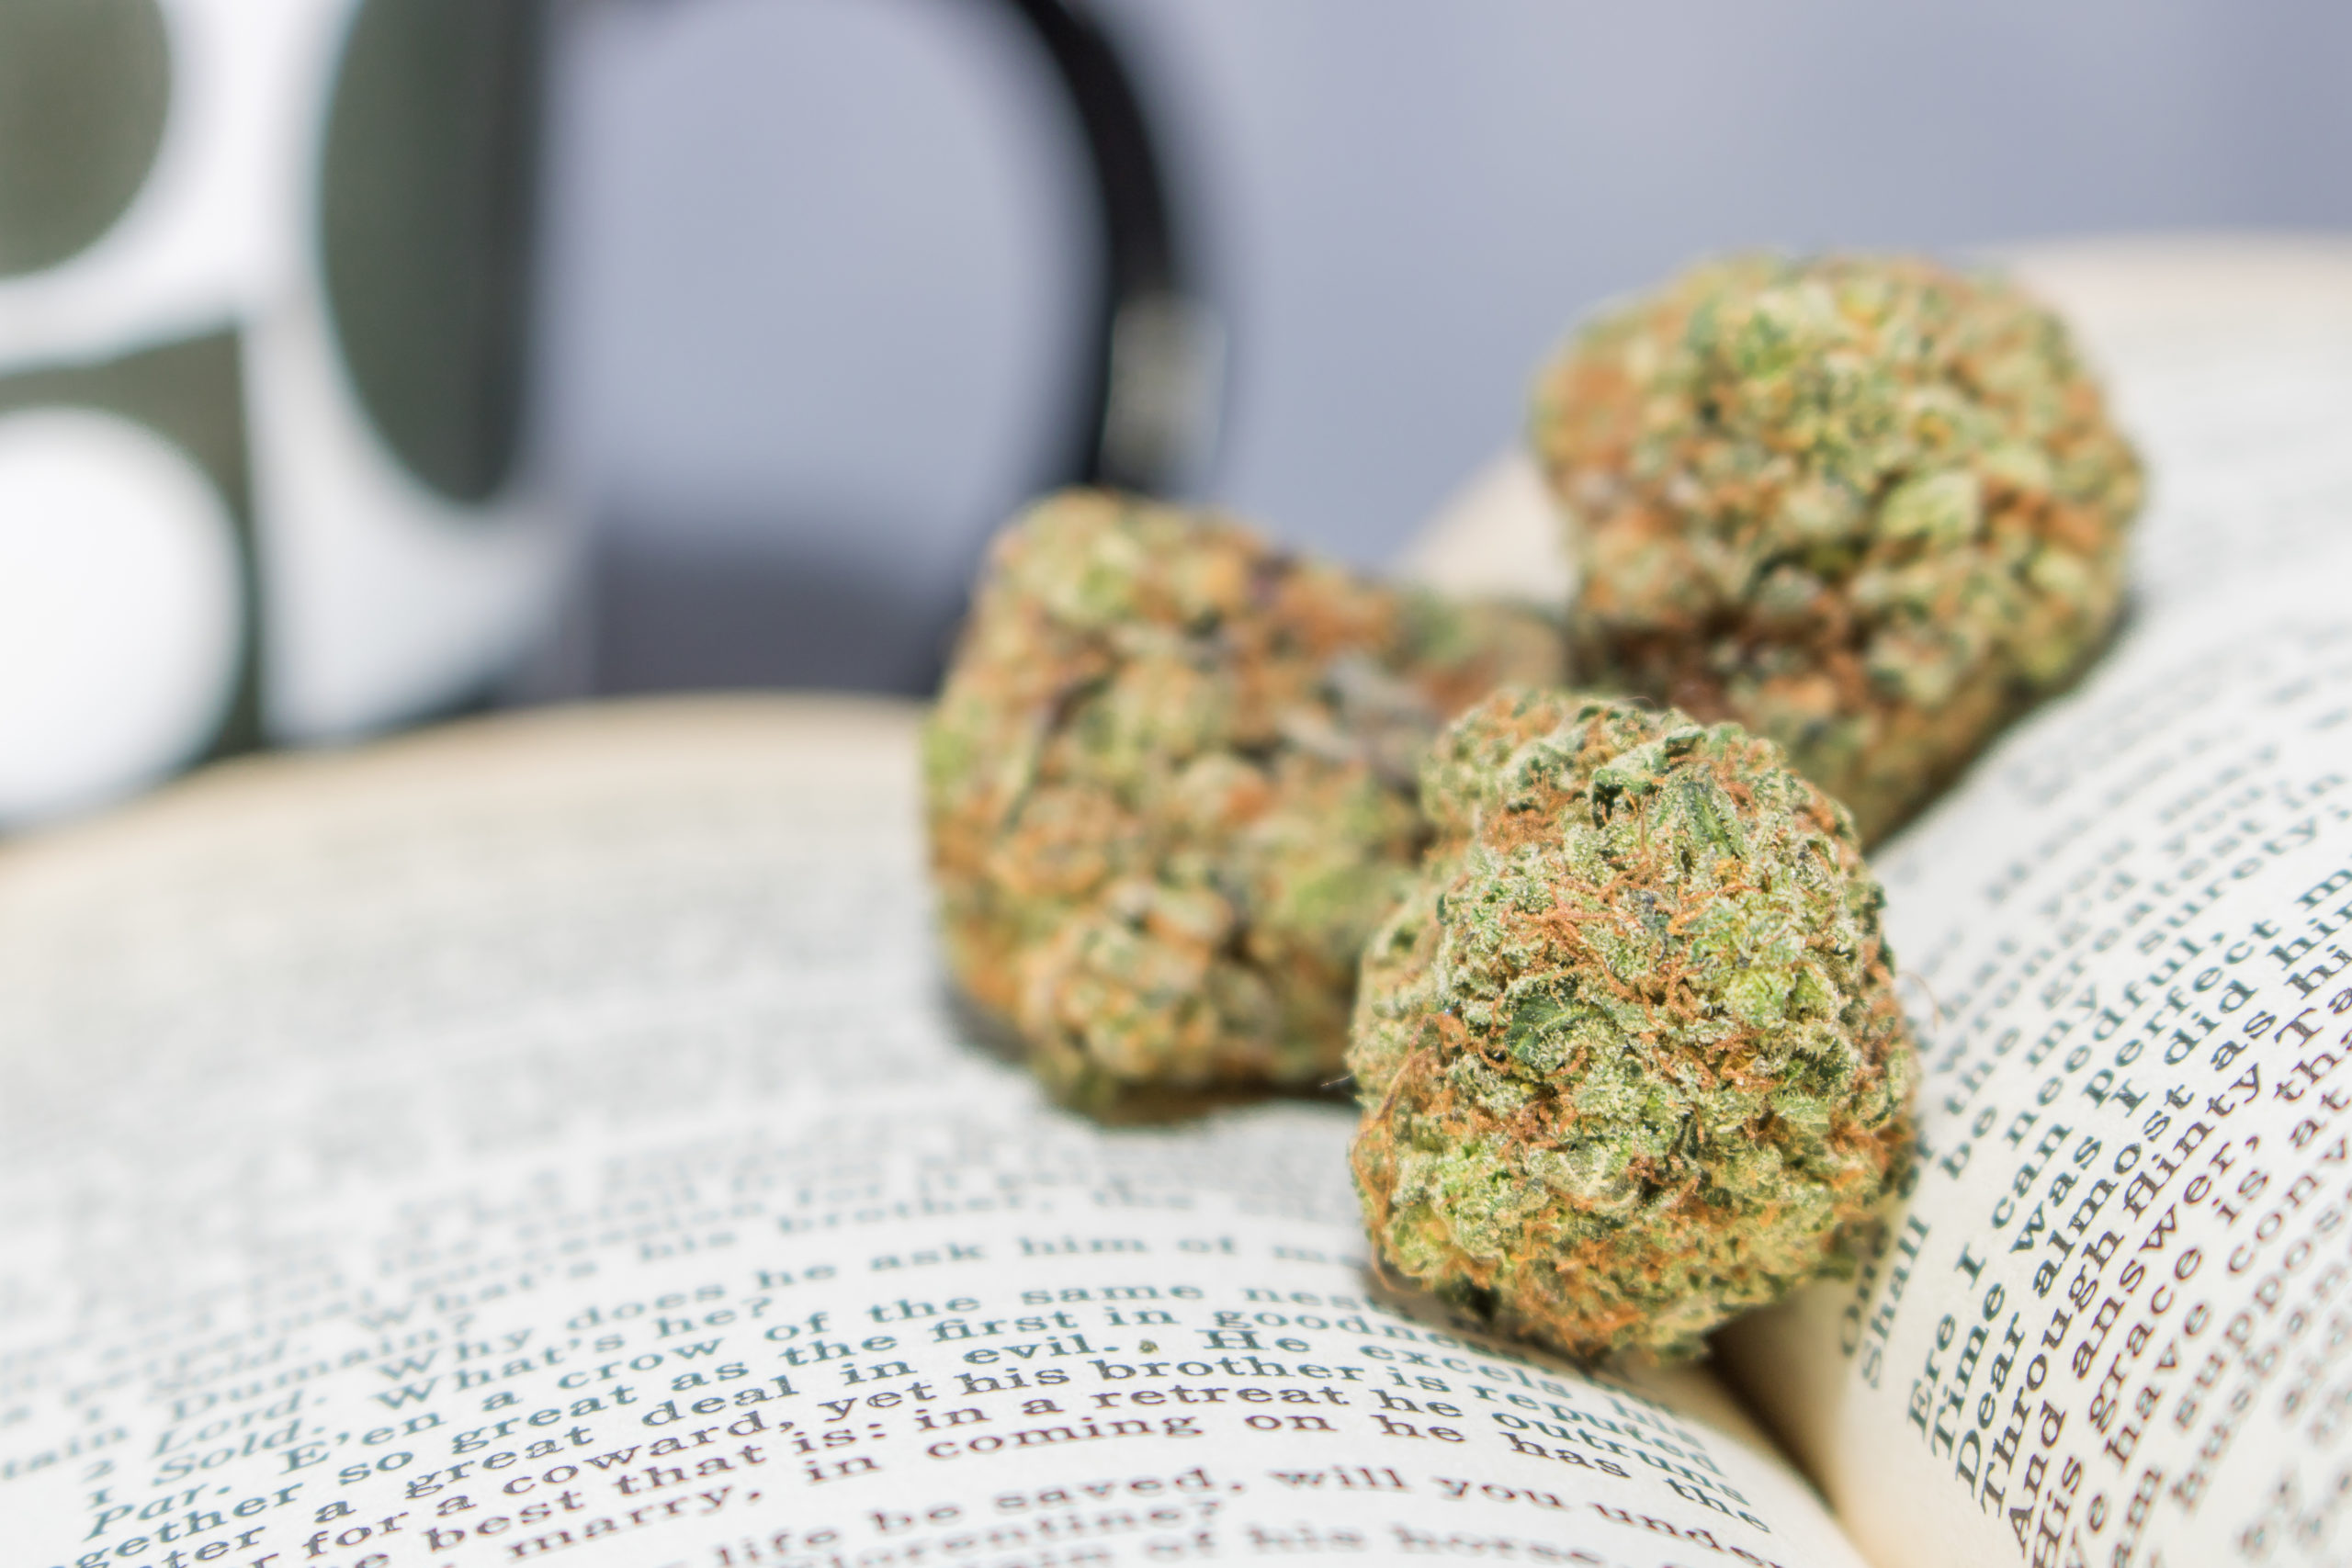 The Best Weed Reads to Build Your Cannabis Library.